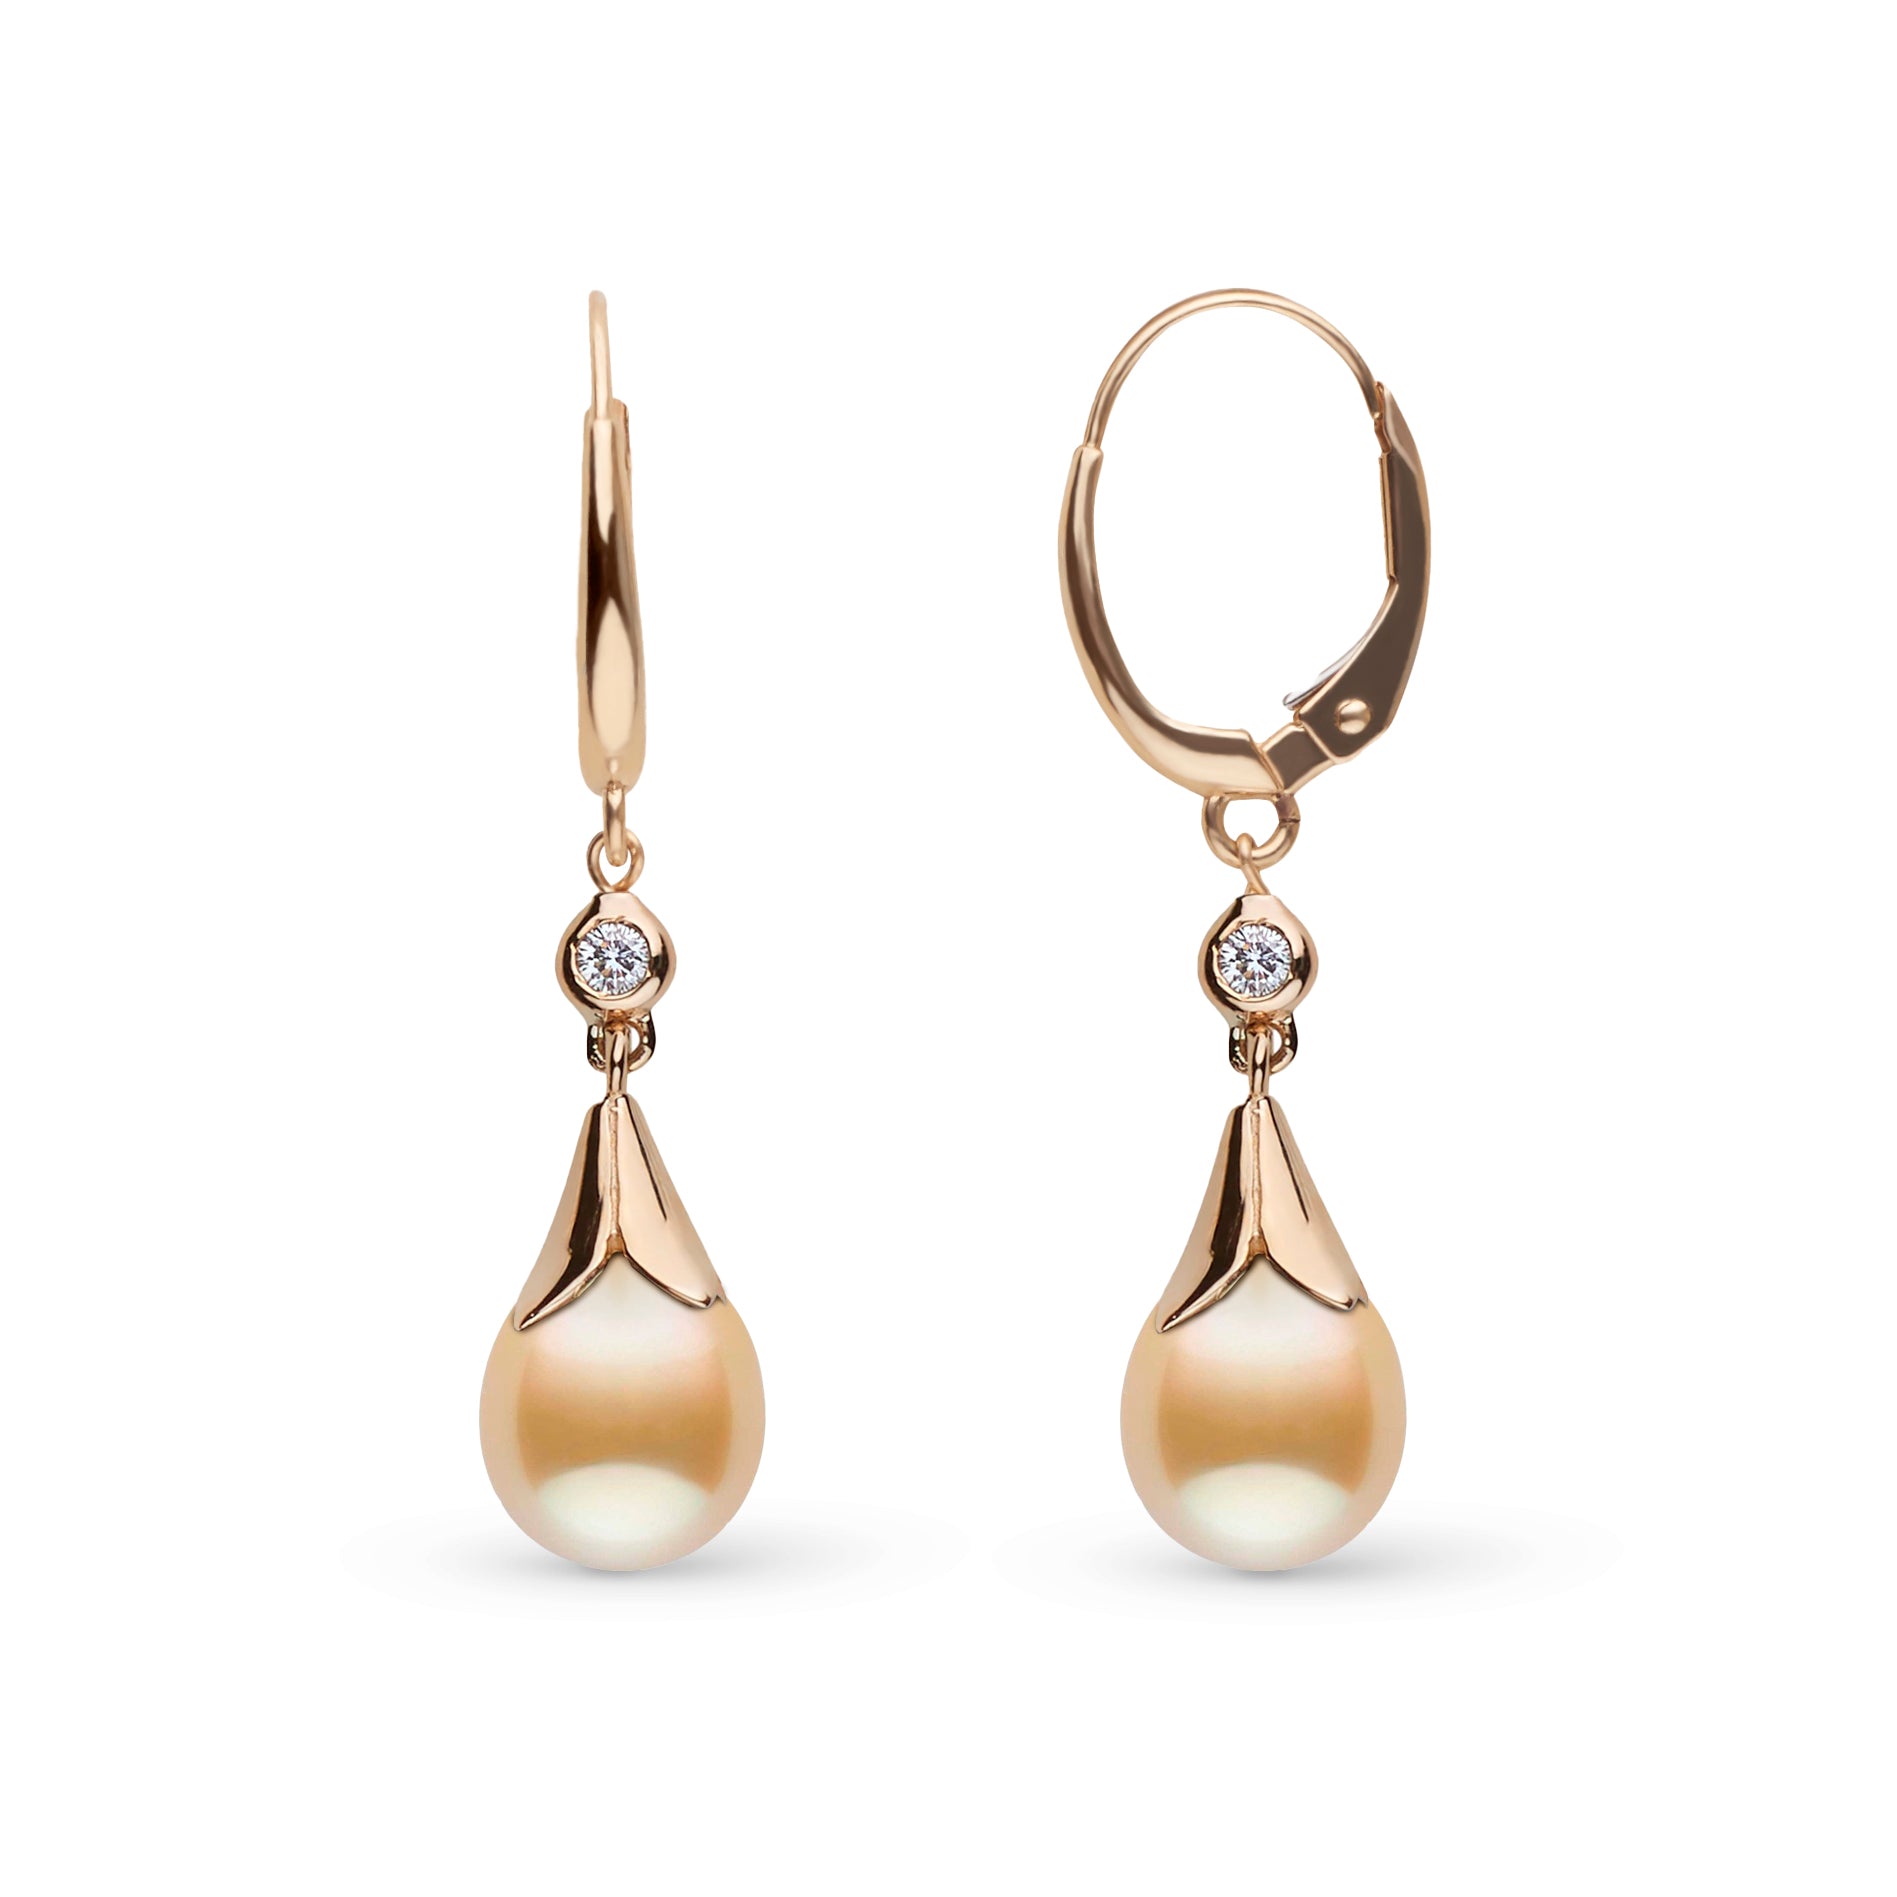 Lilium Collection 9.0-10.0 mm Golden South Sea Drop Pearl and Diamond Earrings